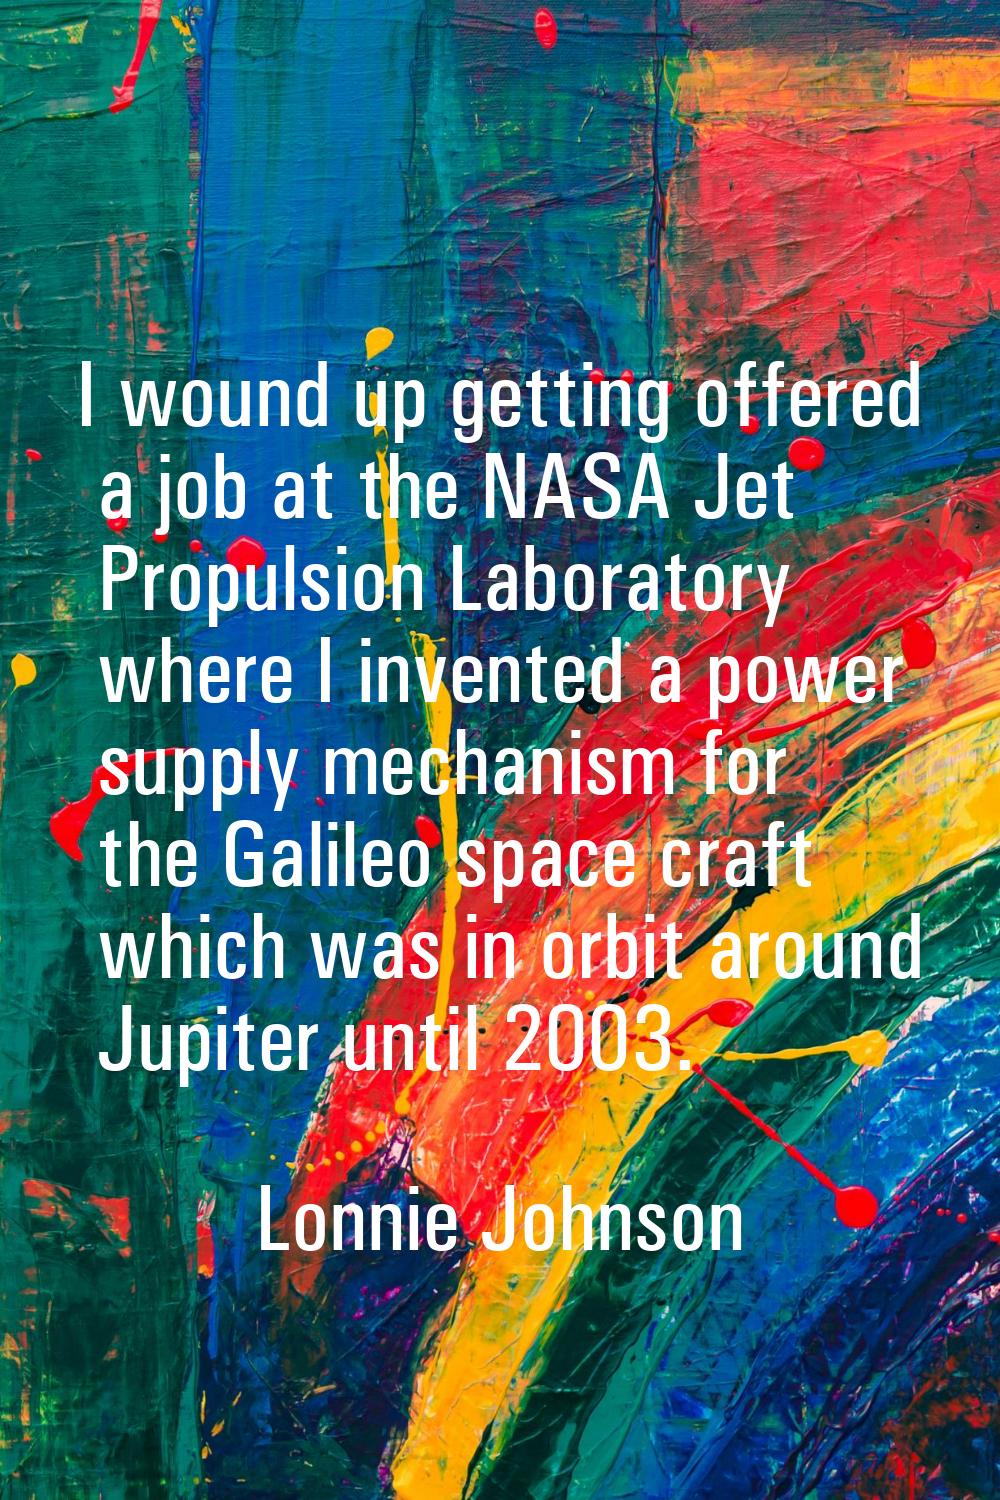 I wound up getting offered a job at the NASA Jet Propulsion Laboratory where I invented a power sup